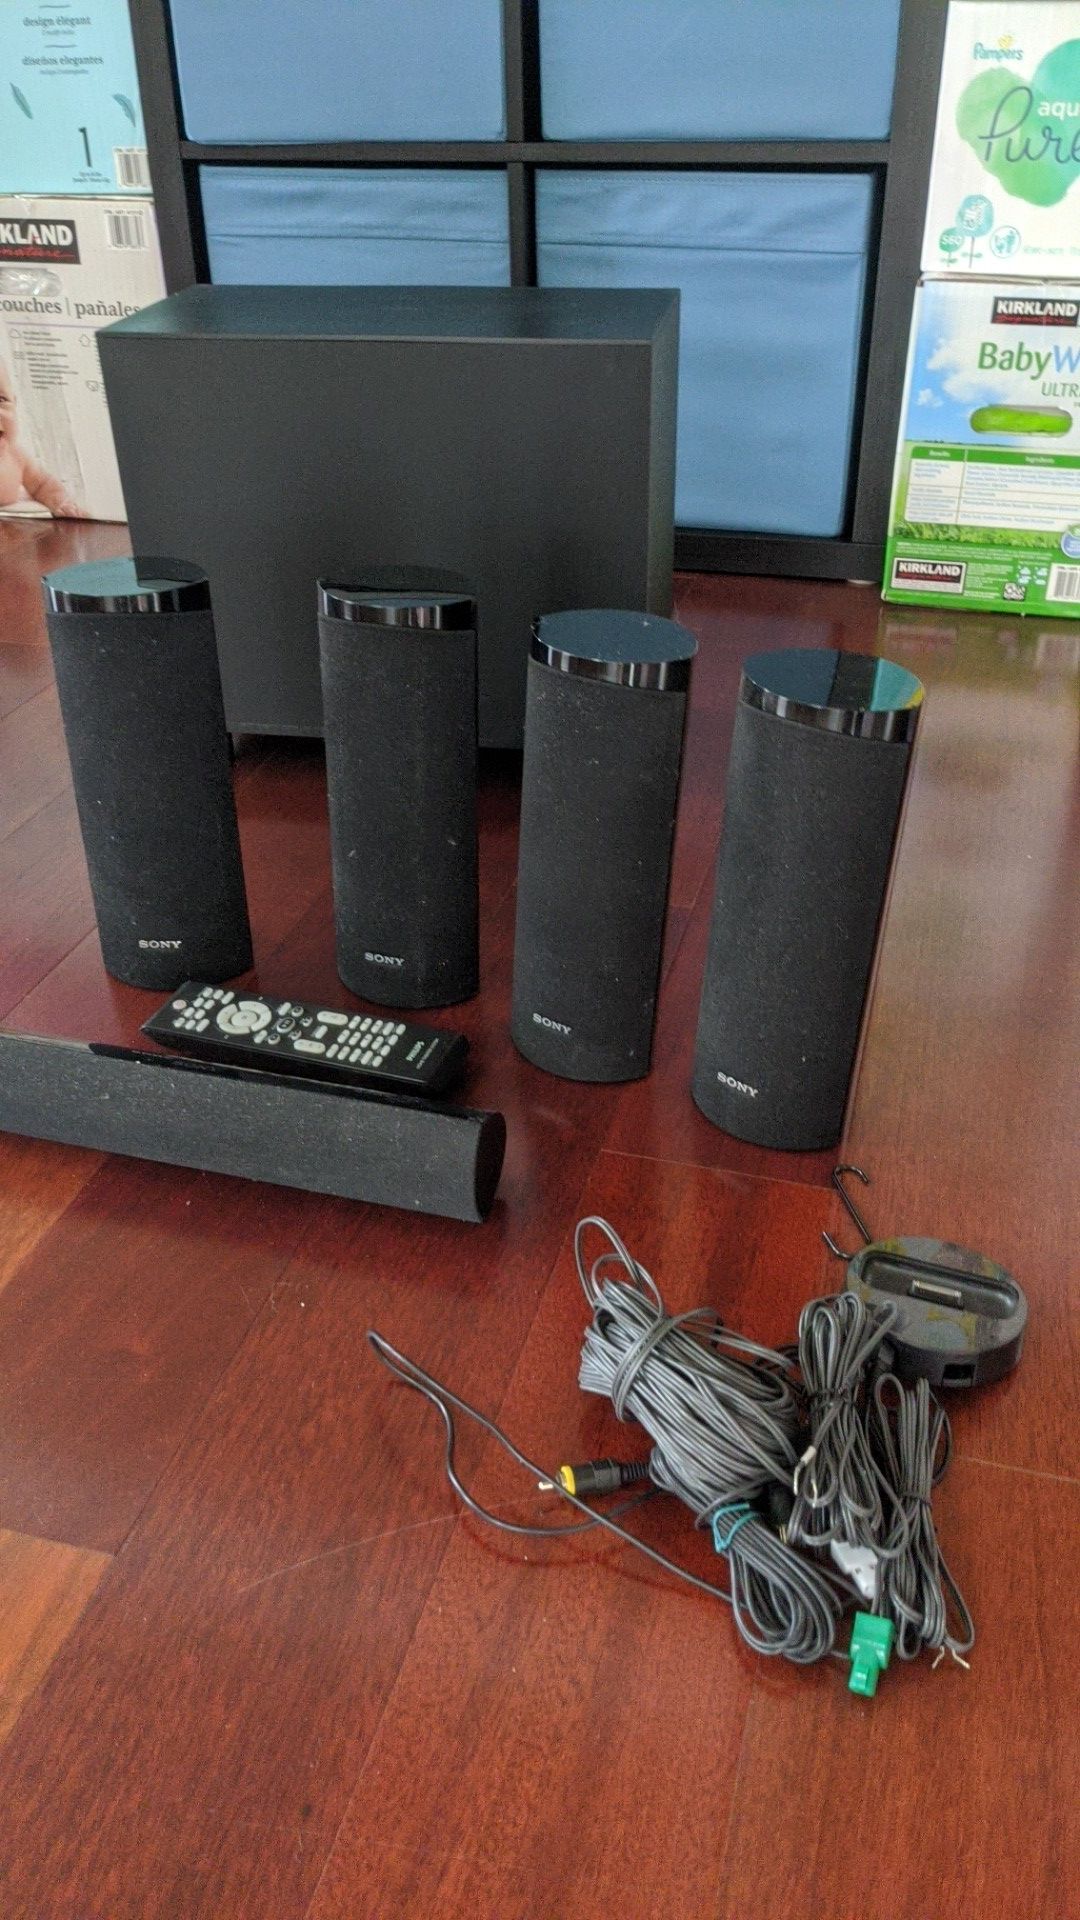 Sony 6 speaker home theater system with Blu-ray player